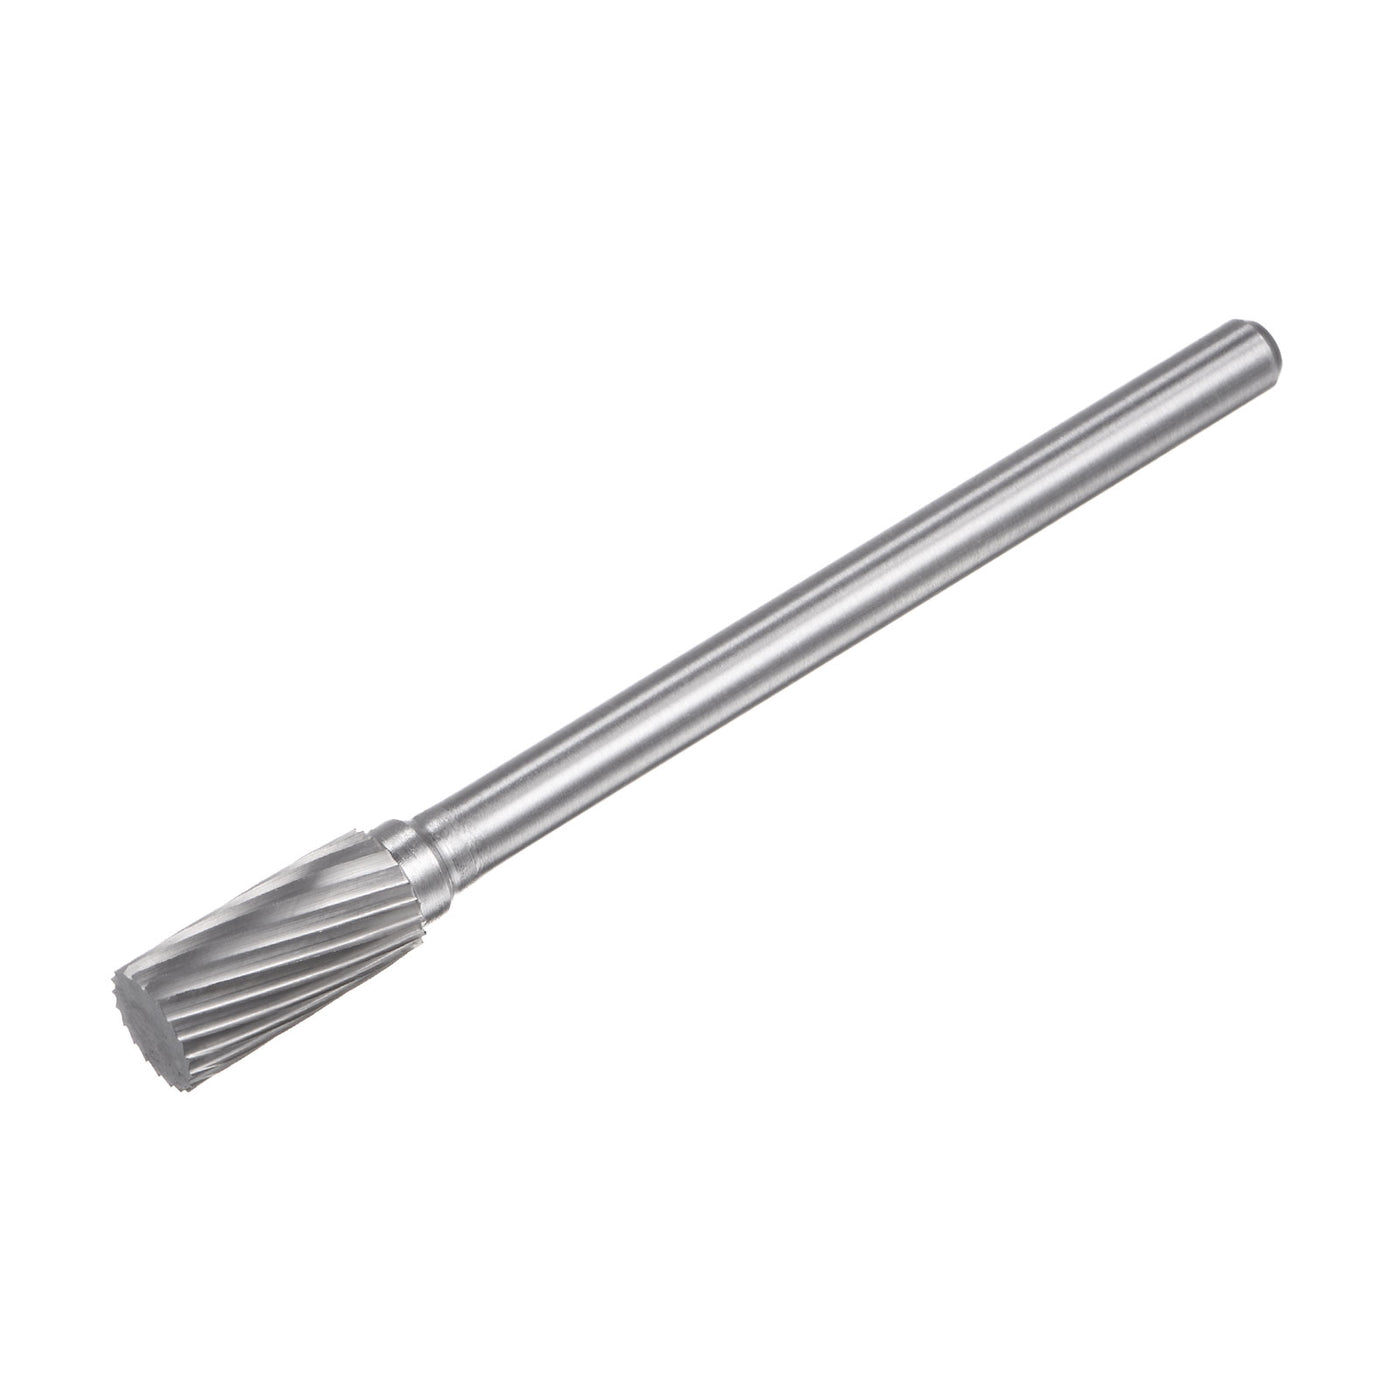 uxcell Uxcell 10mm x 100mm 6mm Shank Single Cut Cylinder Carbide Tip Rotary Files